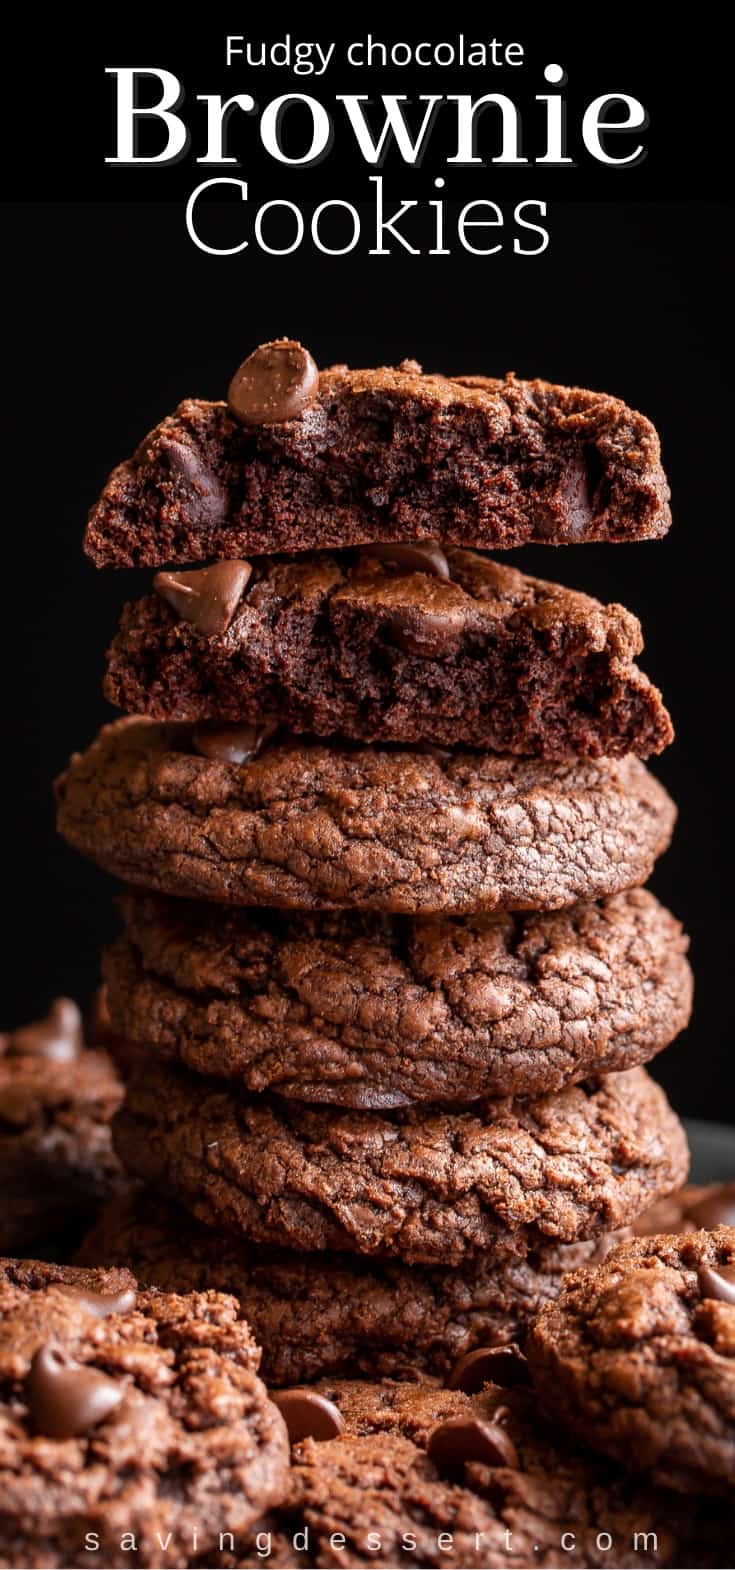 A stack of dark chocolate brownie cookies with chocolate chips